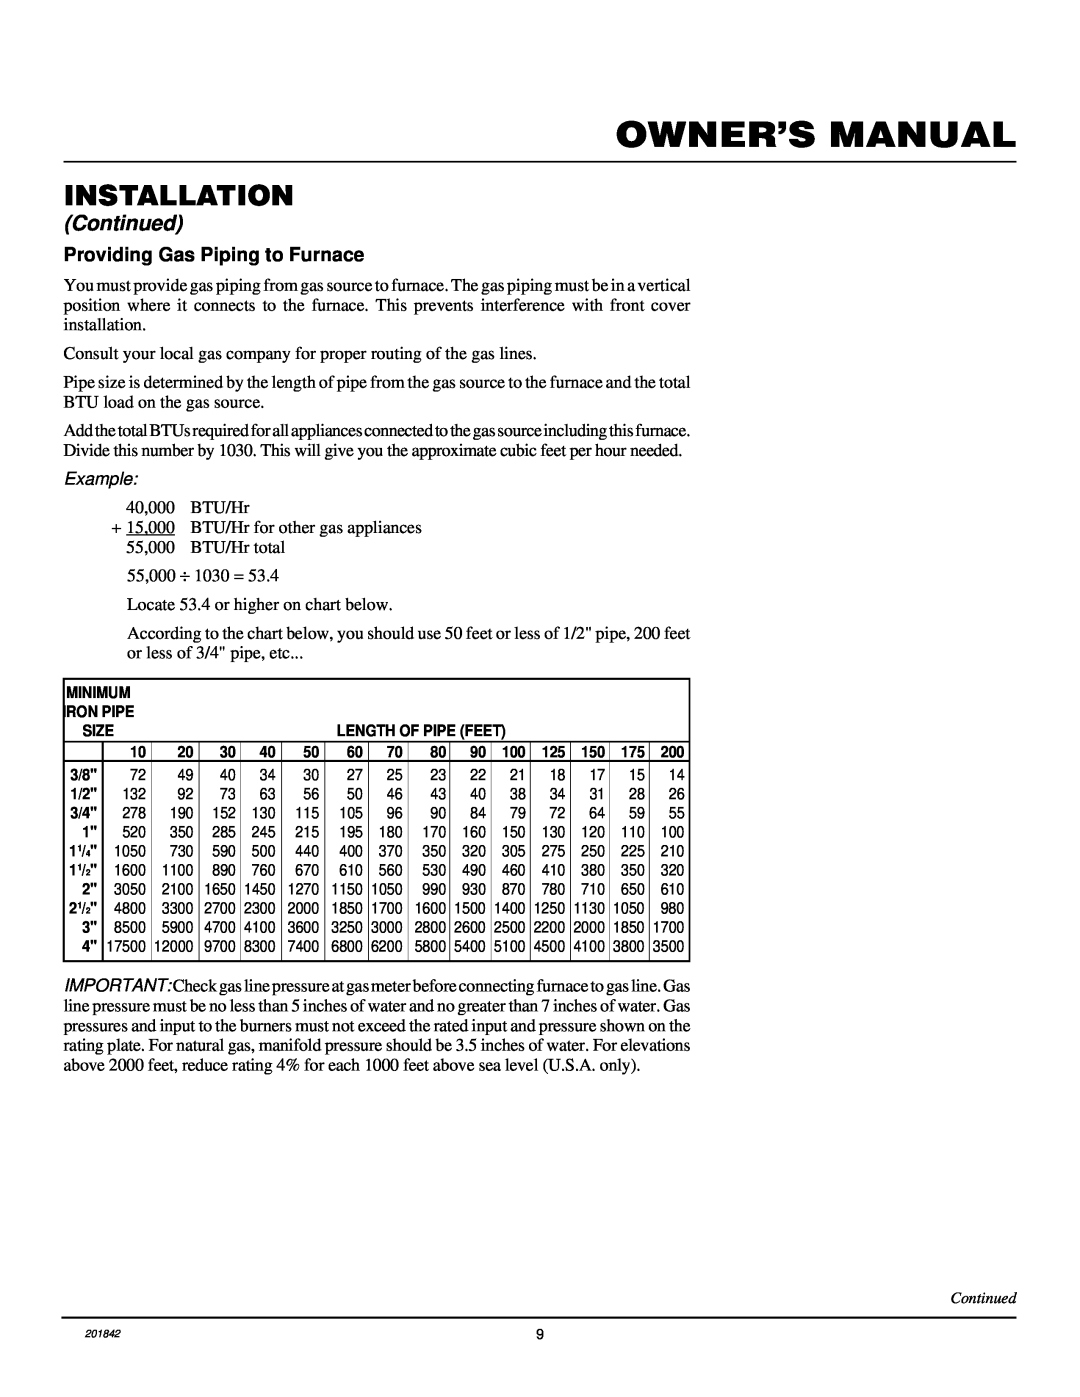 Williams 4003532, 2503532 Owner’S Manual, Installation, Continued, Providing Gas Piping to Furnace, Example 